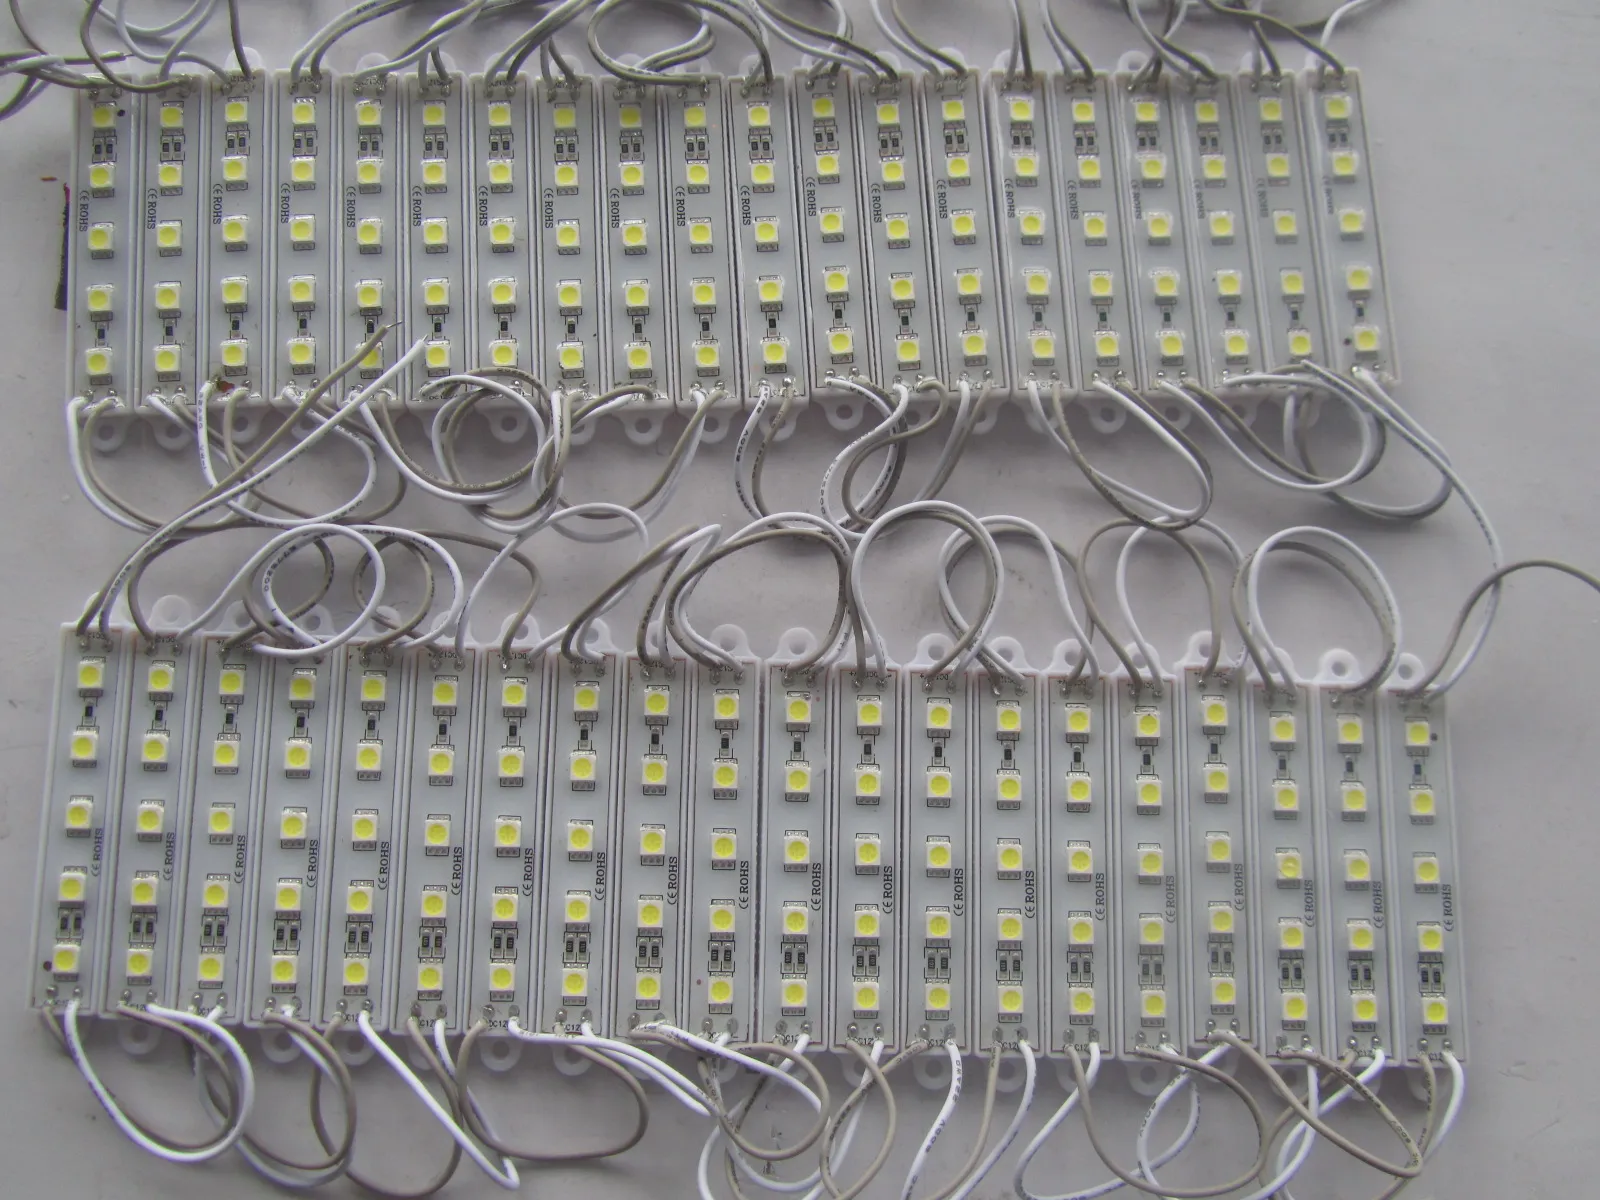 backlight Led Module For Billboard LED sign modules Christmas lamp light 5050 5 LED RGB Green Red Blue Warm White Waterproof DC 128327058